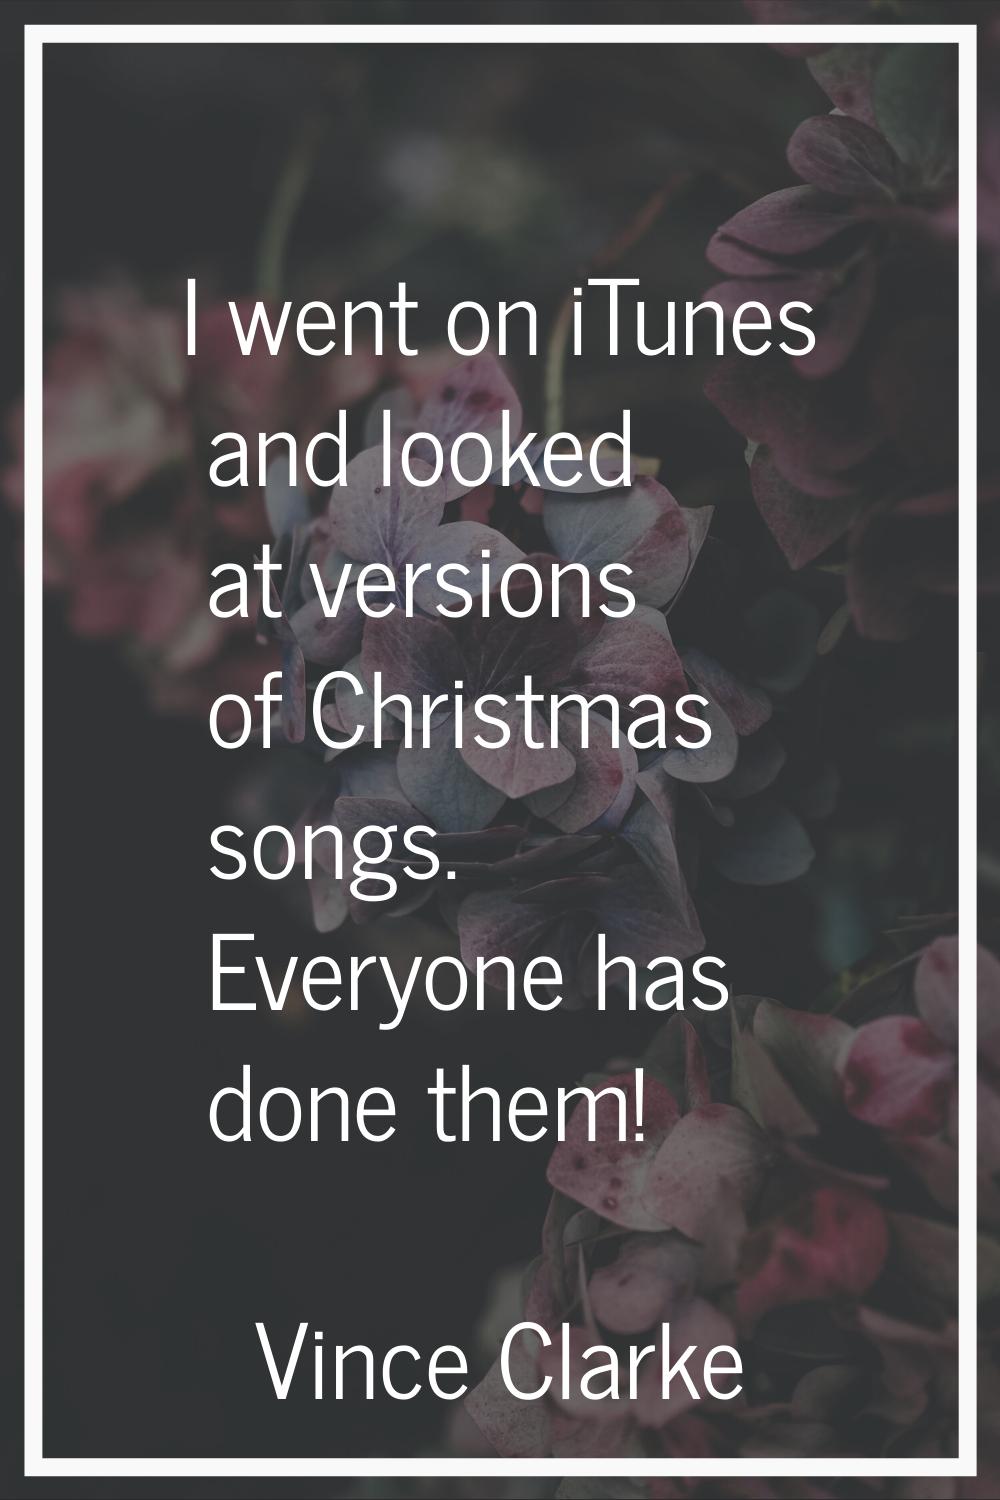 I went on iTunes and looked at versions of Christmas songs. Everyone has done them!